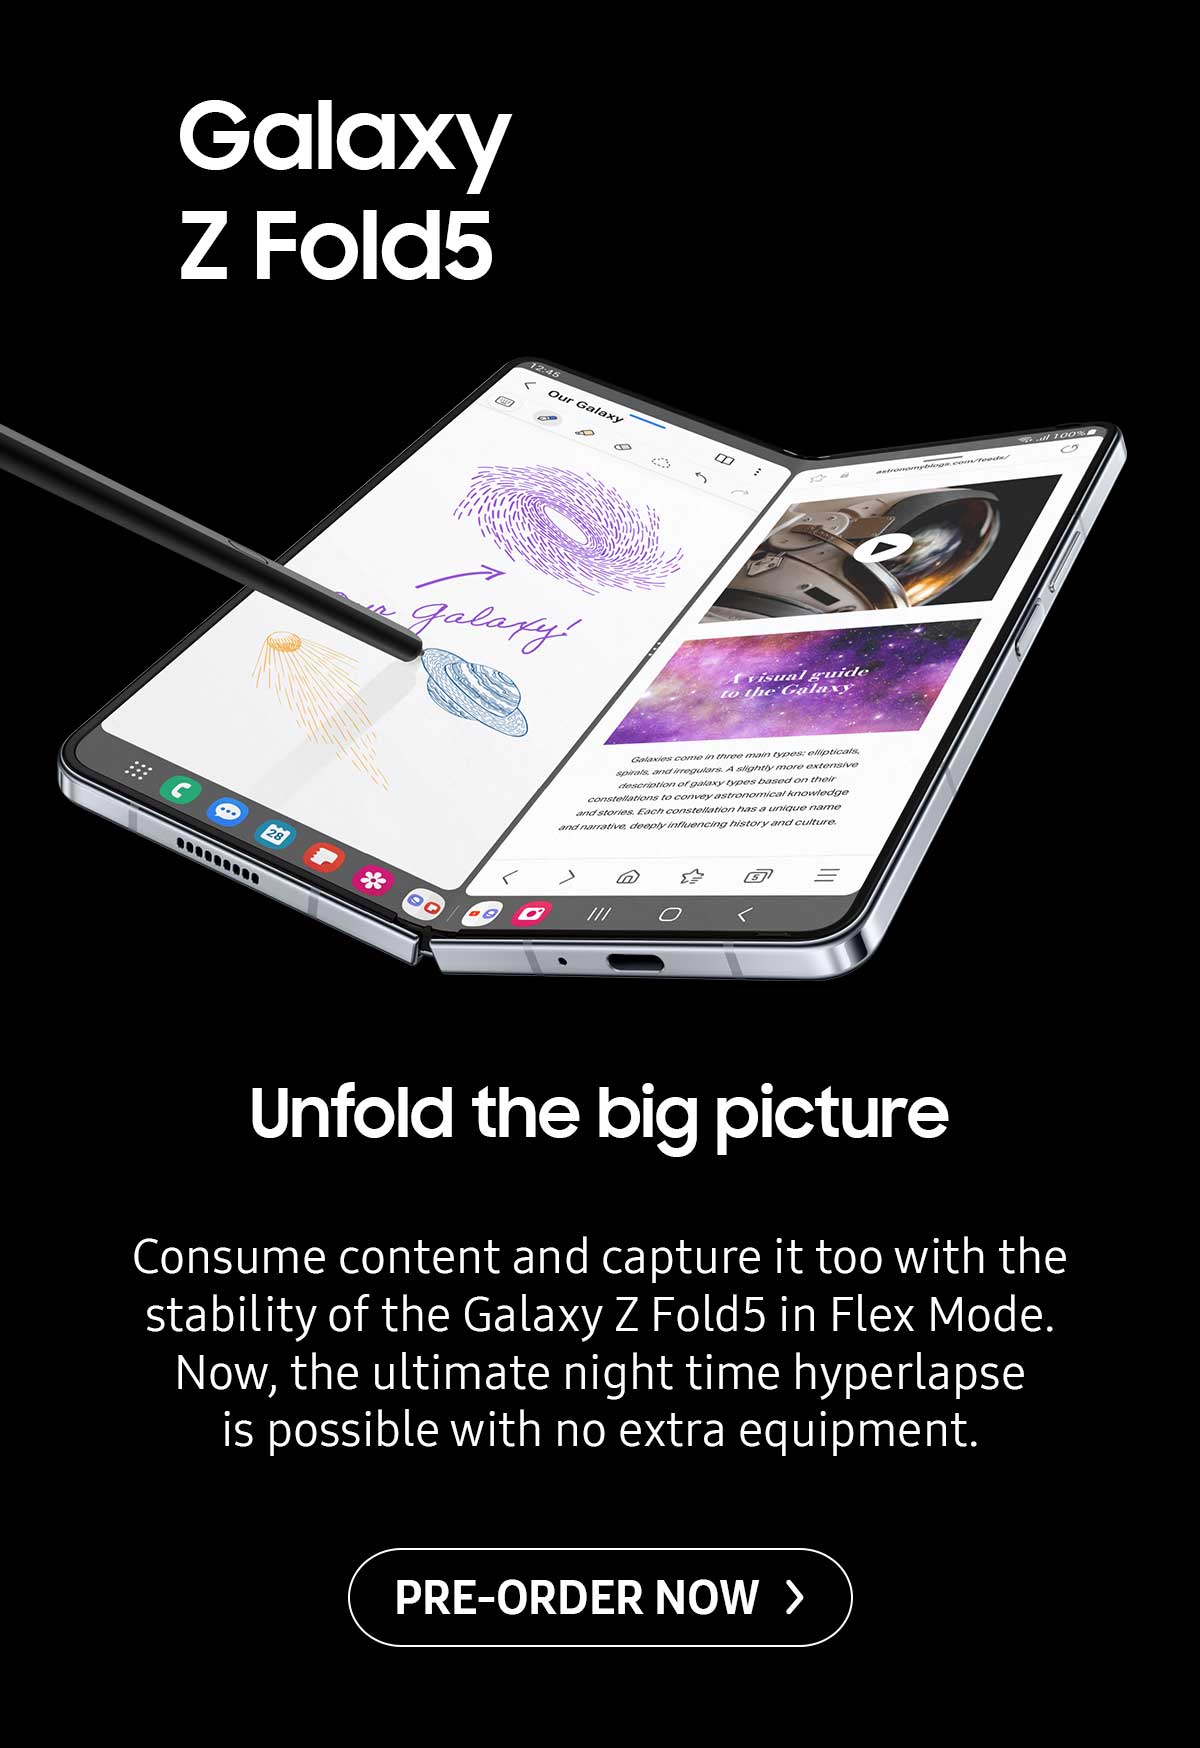 Galaxy Z Fold5. Unfold the big picture. Consume content and capture it too with the stability of the Galaxy Z Fold5 in Flex Mode. Now, the ultimate night time hyperlapse is possible with no extra equipment. Pre-order now!